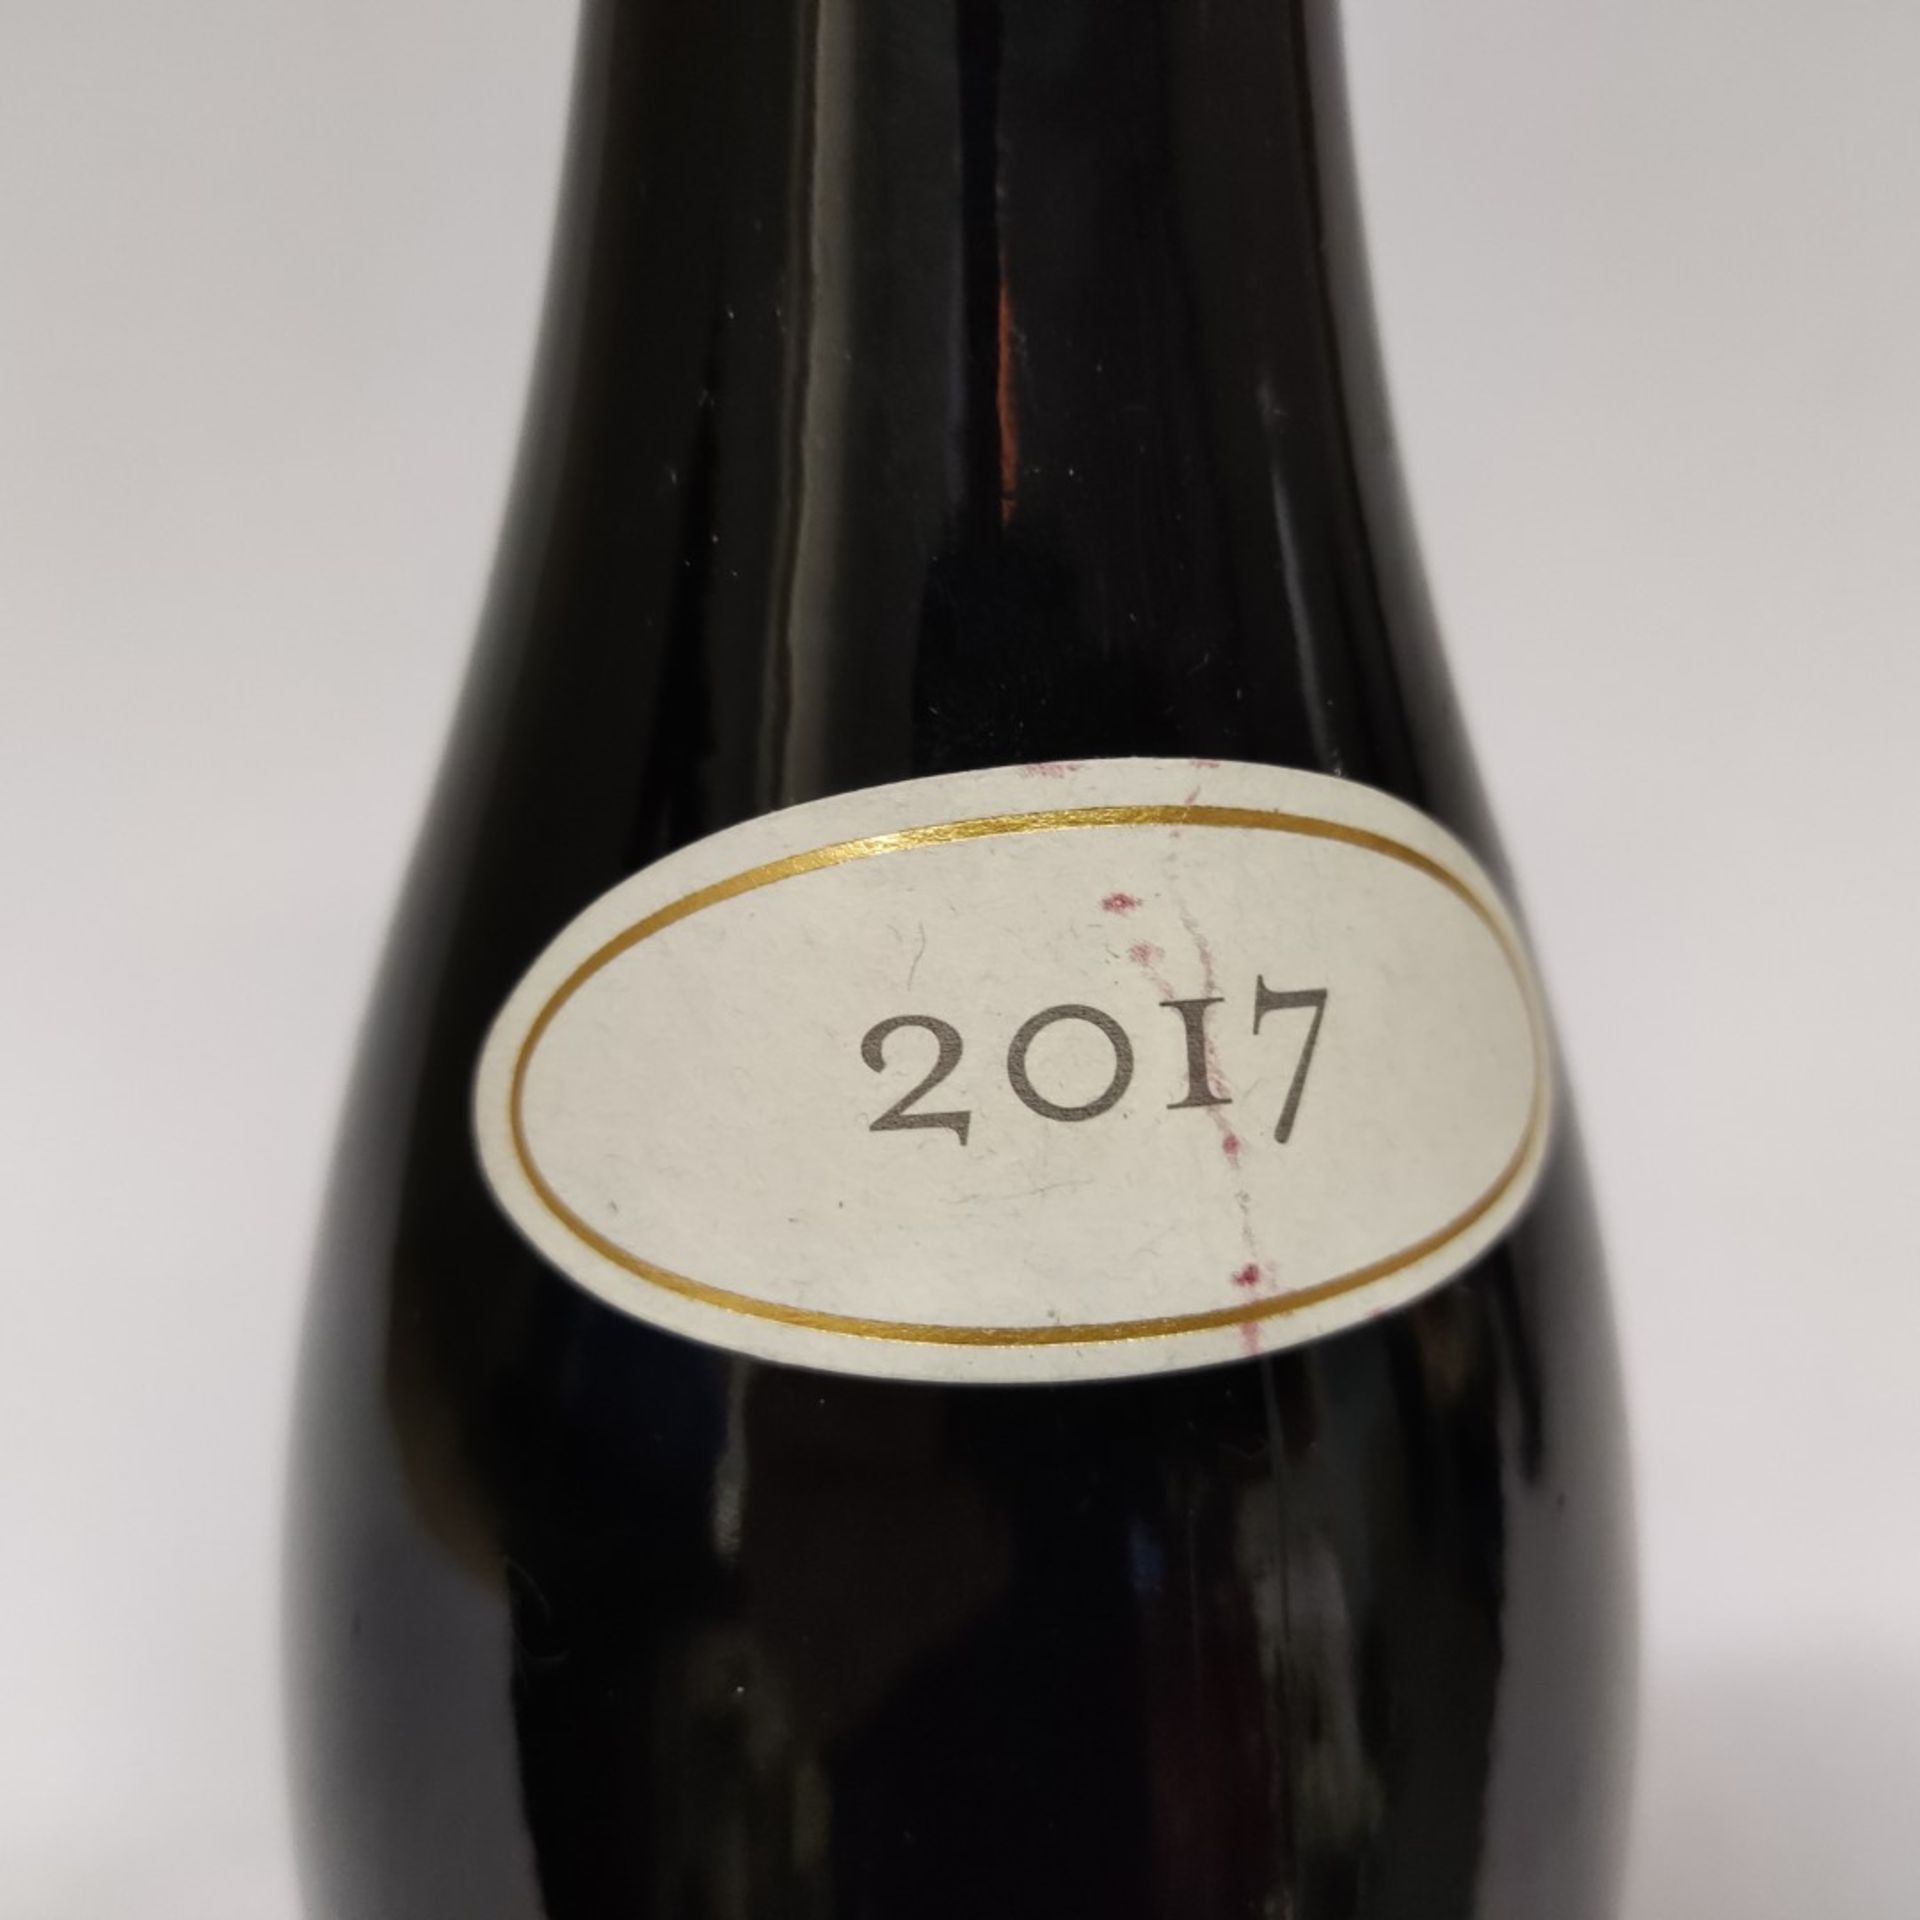 1 x Bottle of 2017 Ruchottes - Chambertin Grand Cru Domaine Marchand - Grillot - Red Wine - Retail P - Image 3 of 5